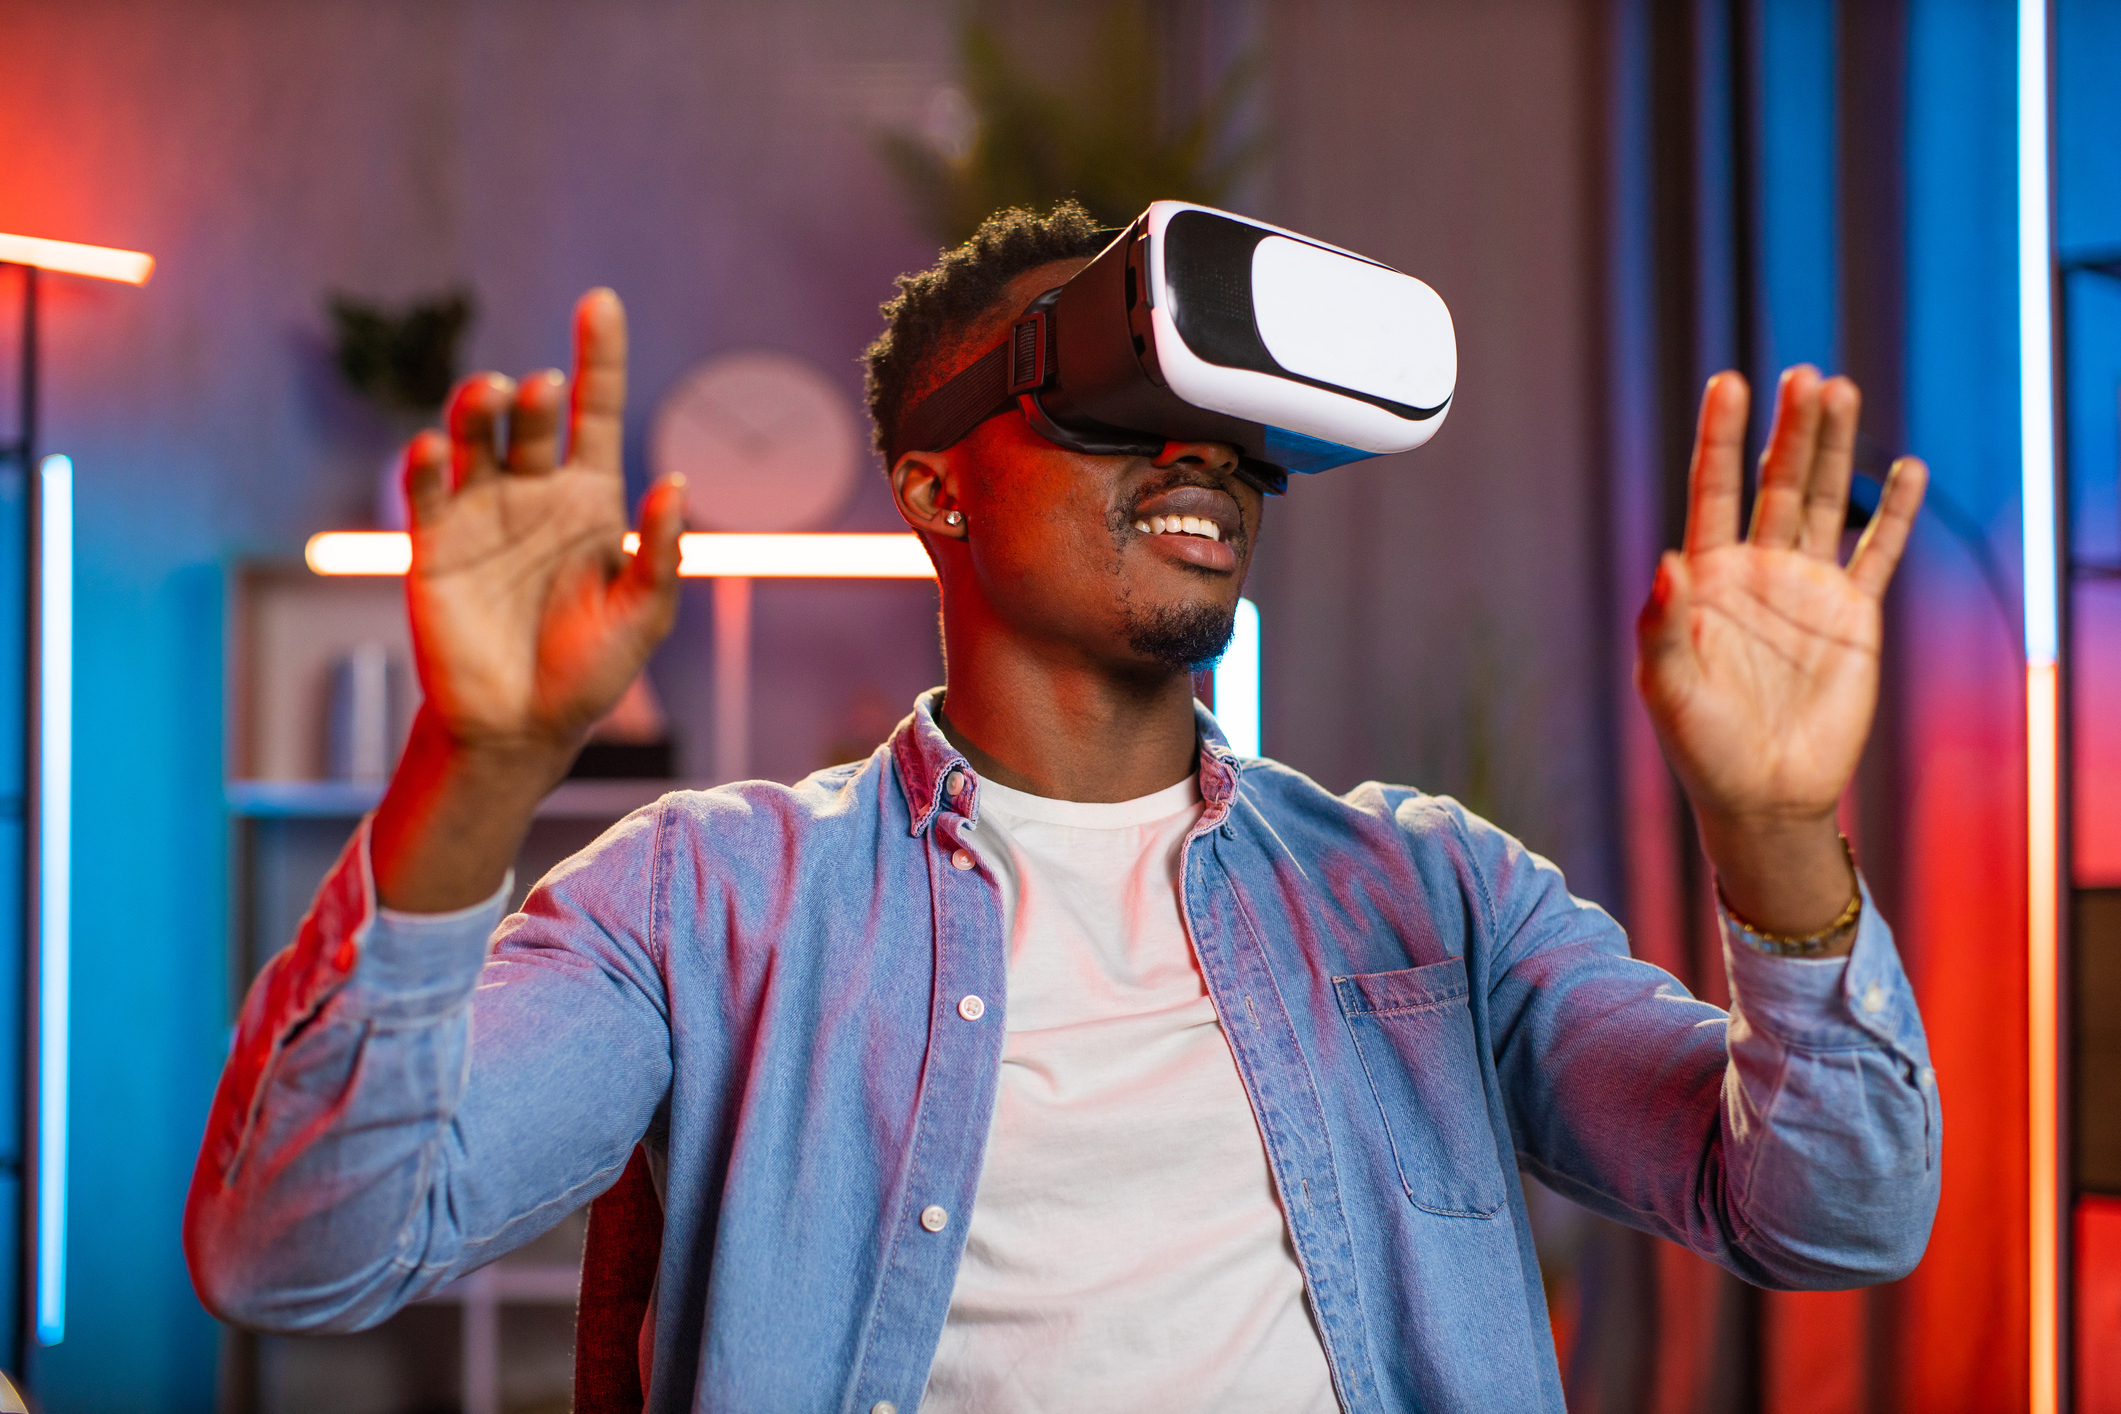 A young man wearing a headset and playing a virtual reality game.